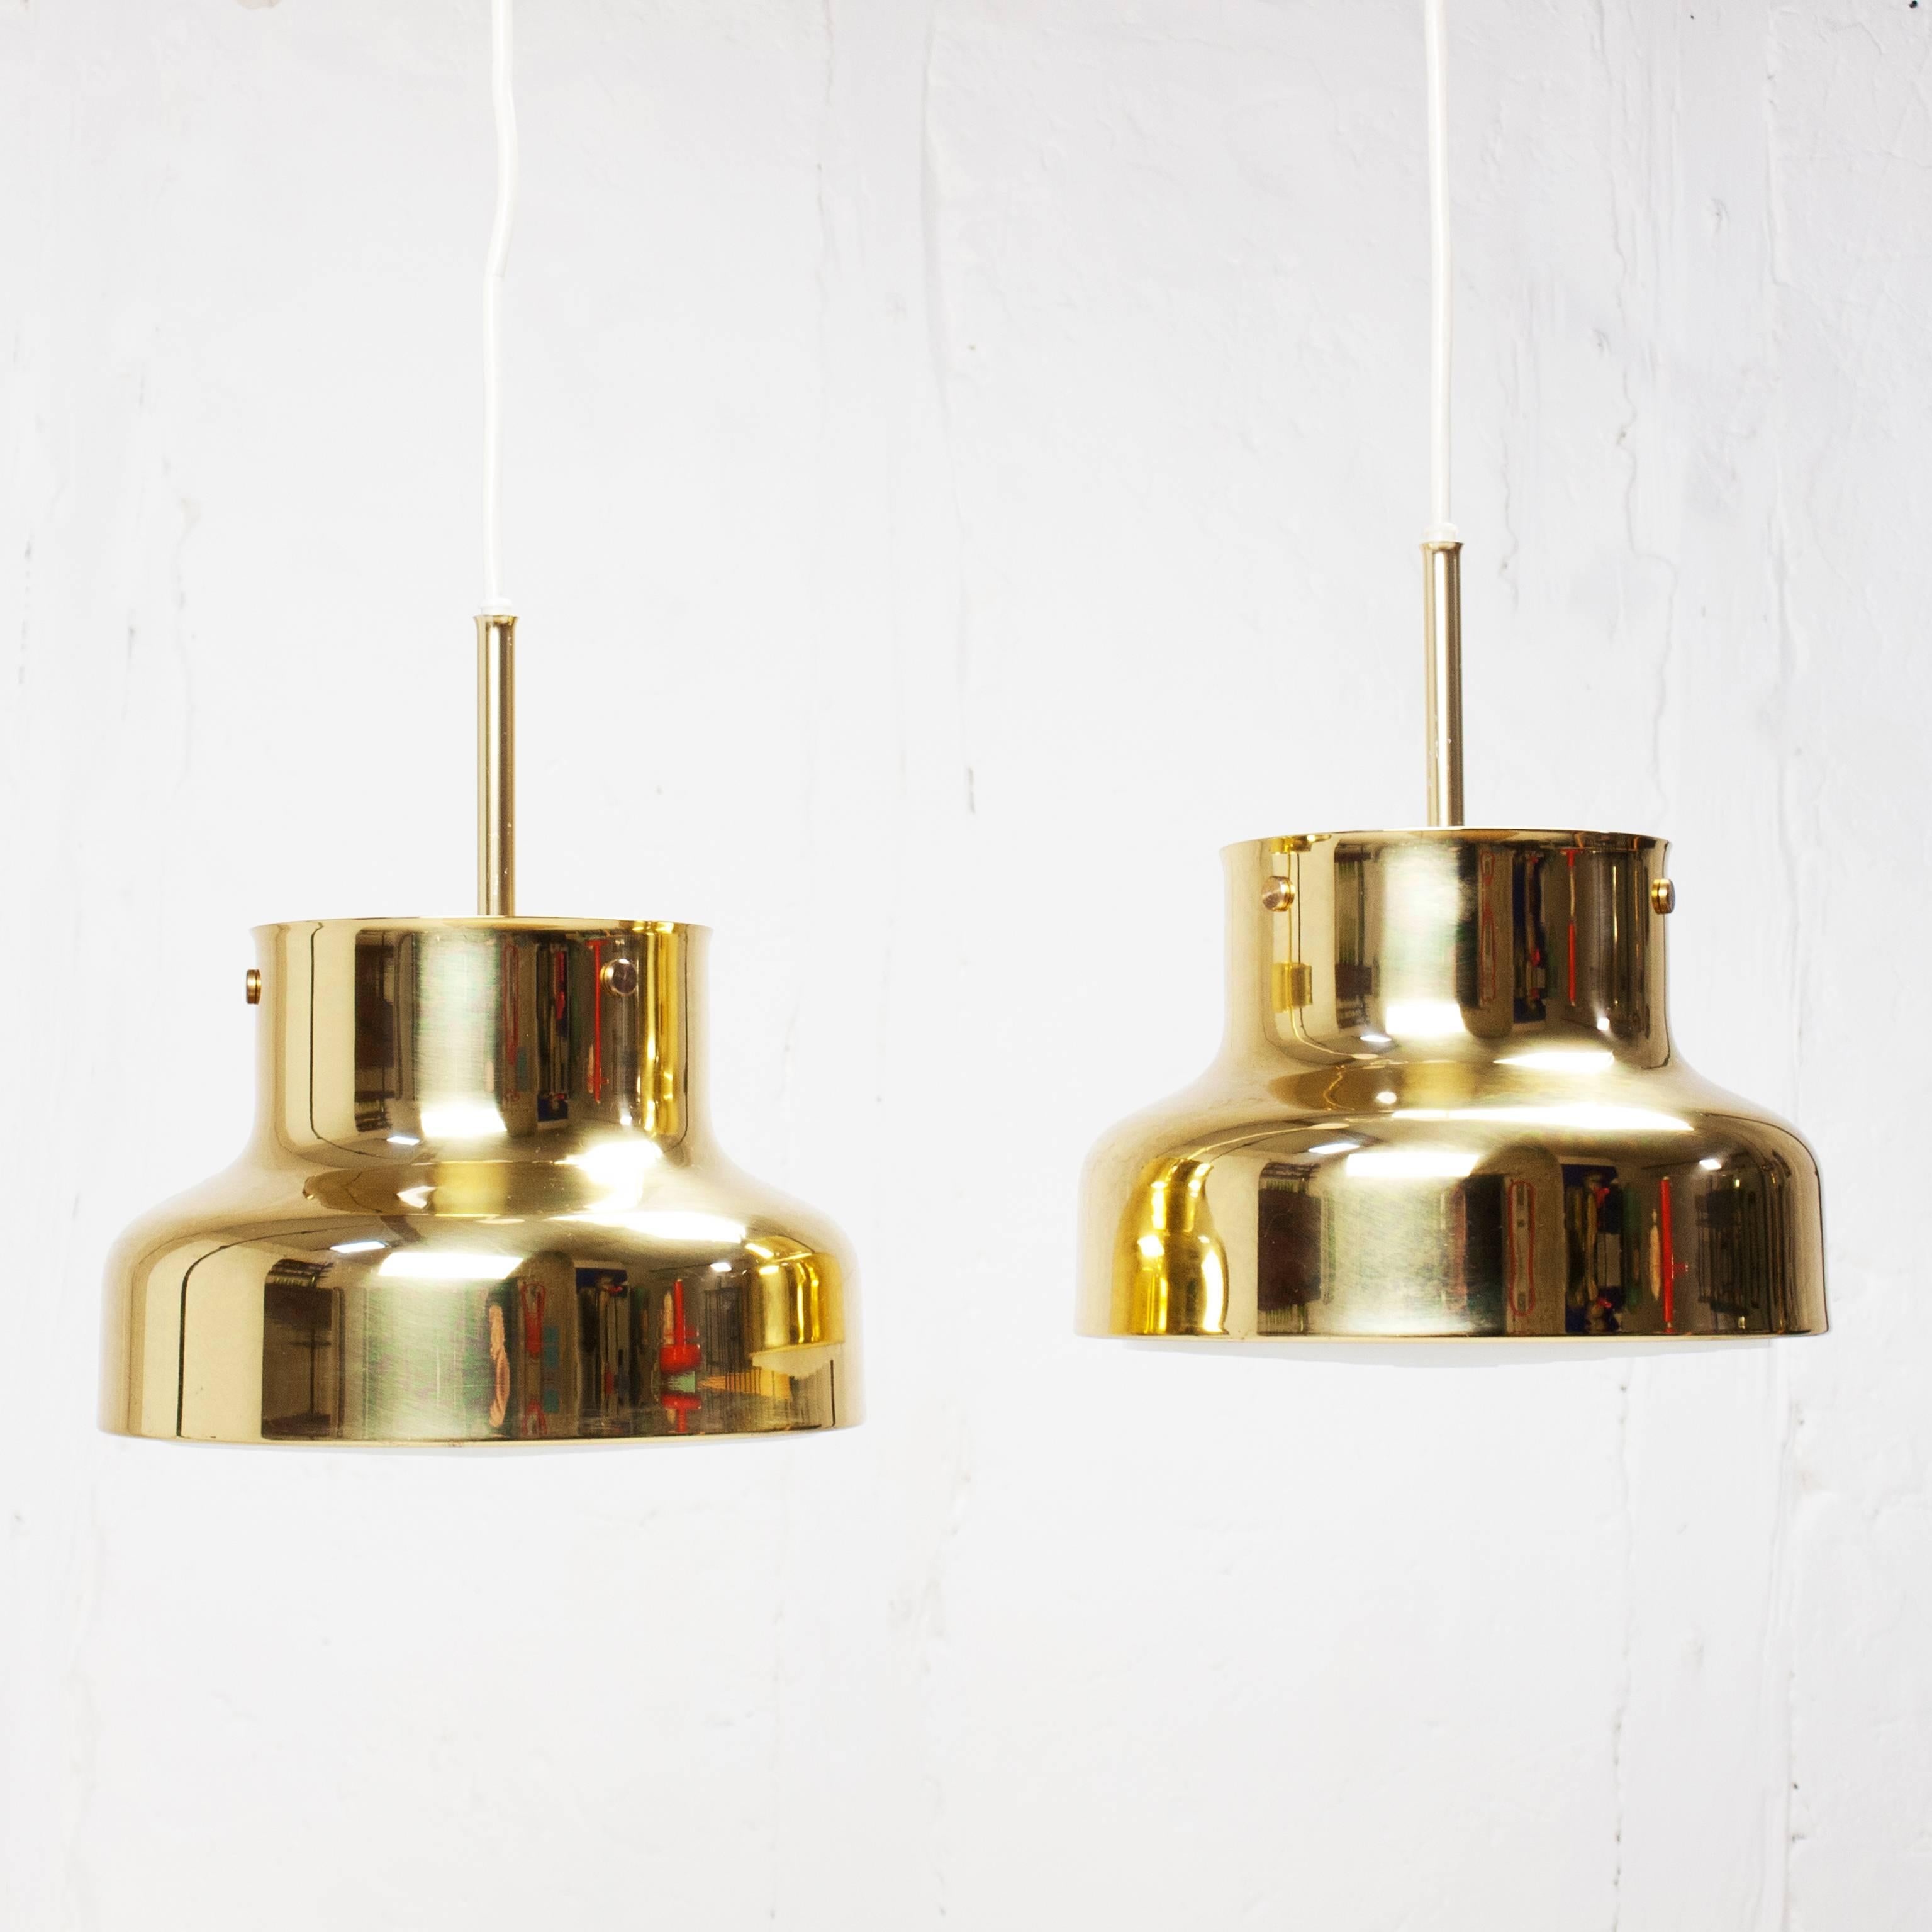 Pair of bumling brass hanging lamps by Anders Pehrson, Swedish designer from the 1960s. Brass frame. Manufactured by Ateljé Lyktan. Diameter 25 cms. In very good condition.
     